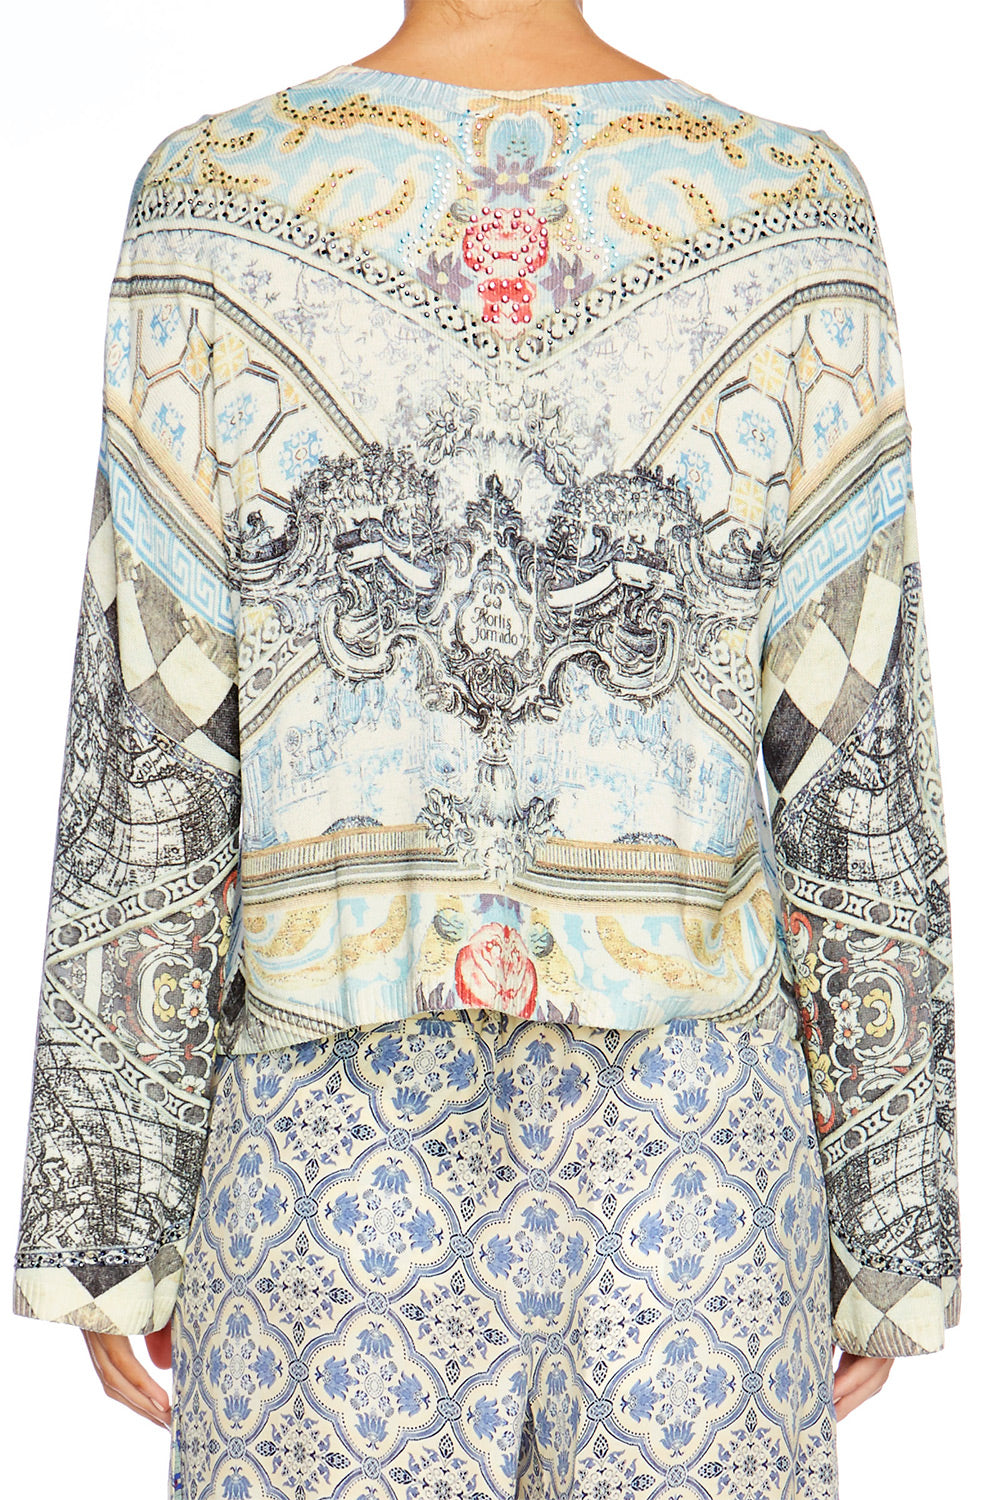 LOST IN A DREAM PRINTED KNITTED JUMPER